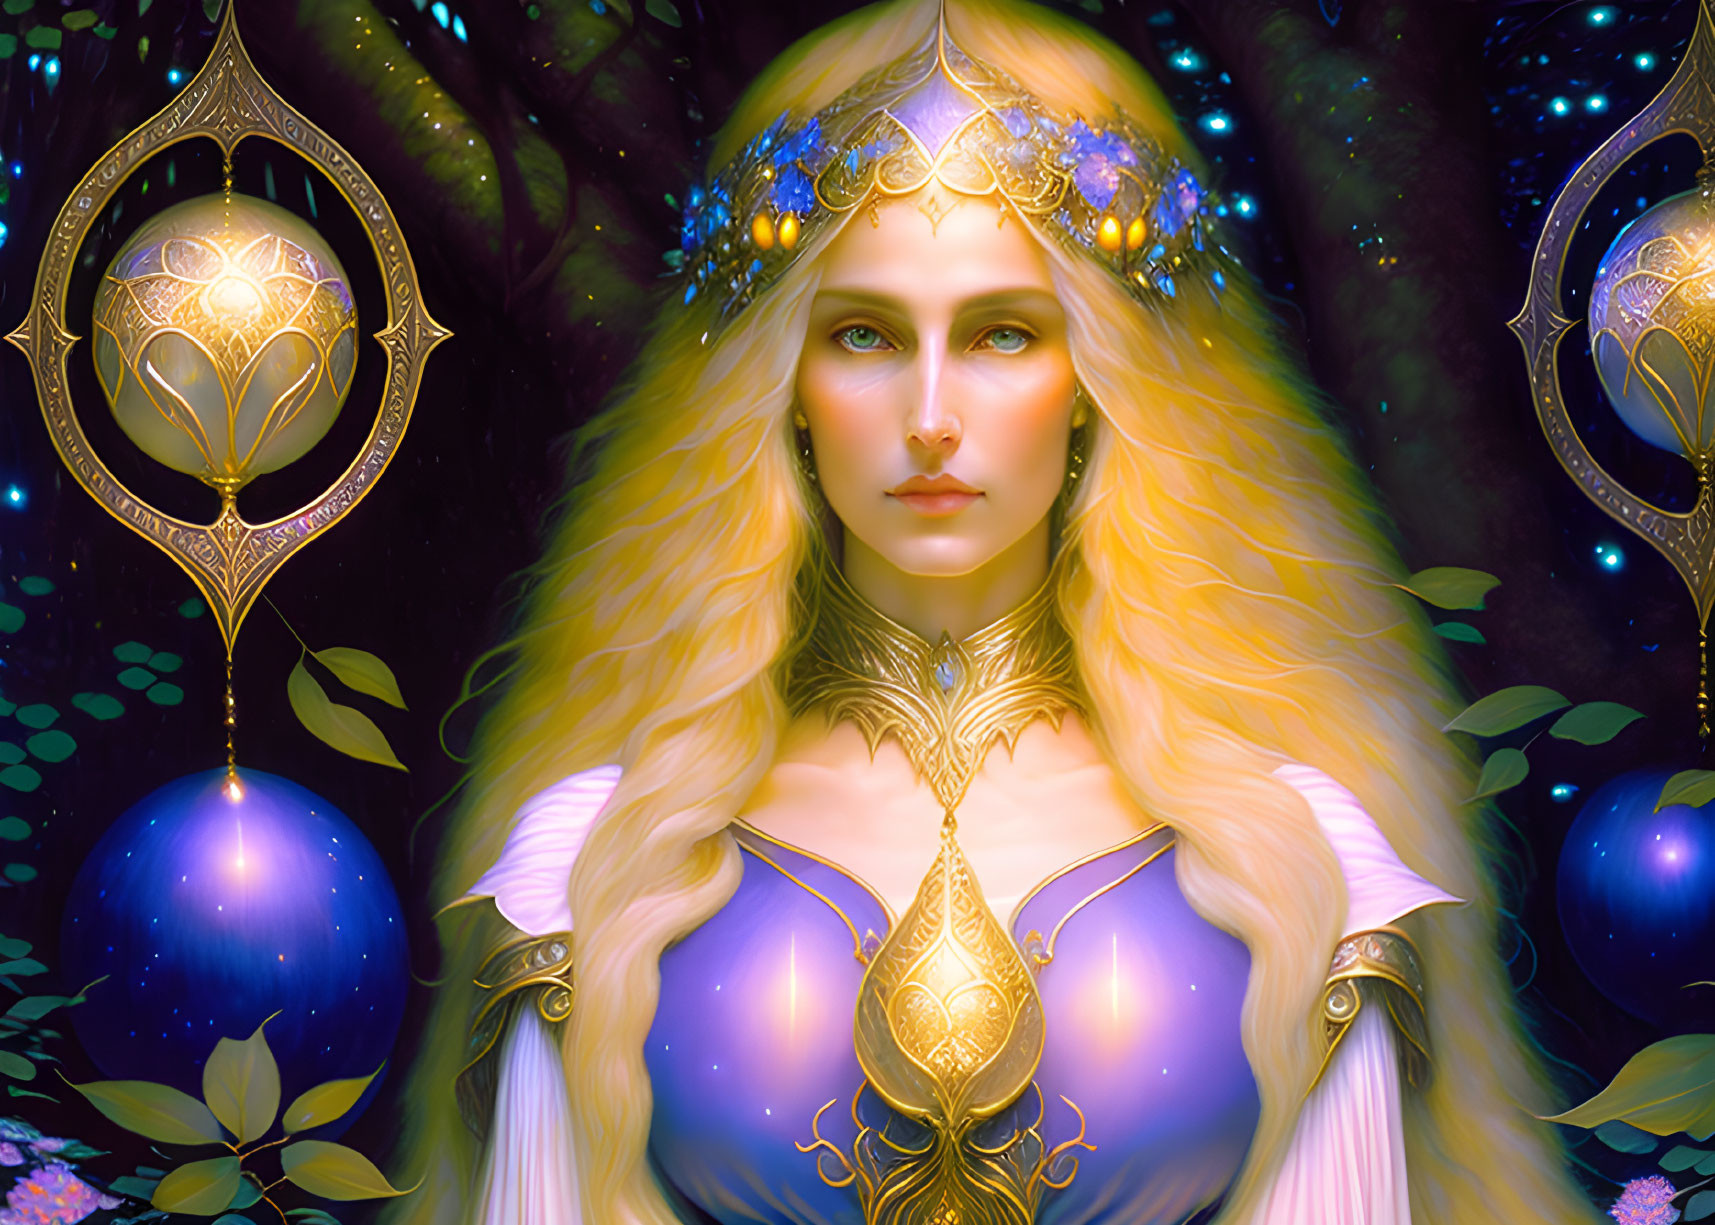 Blond-haired woman in jeweled crown in mystical woodland scenery